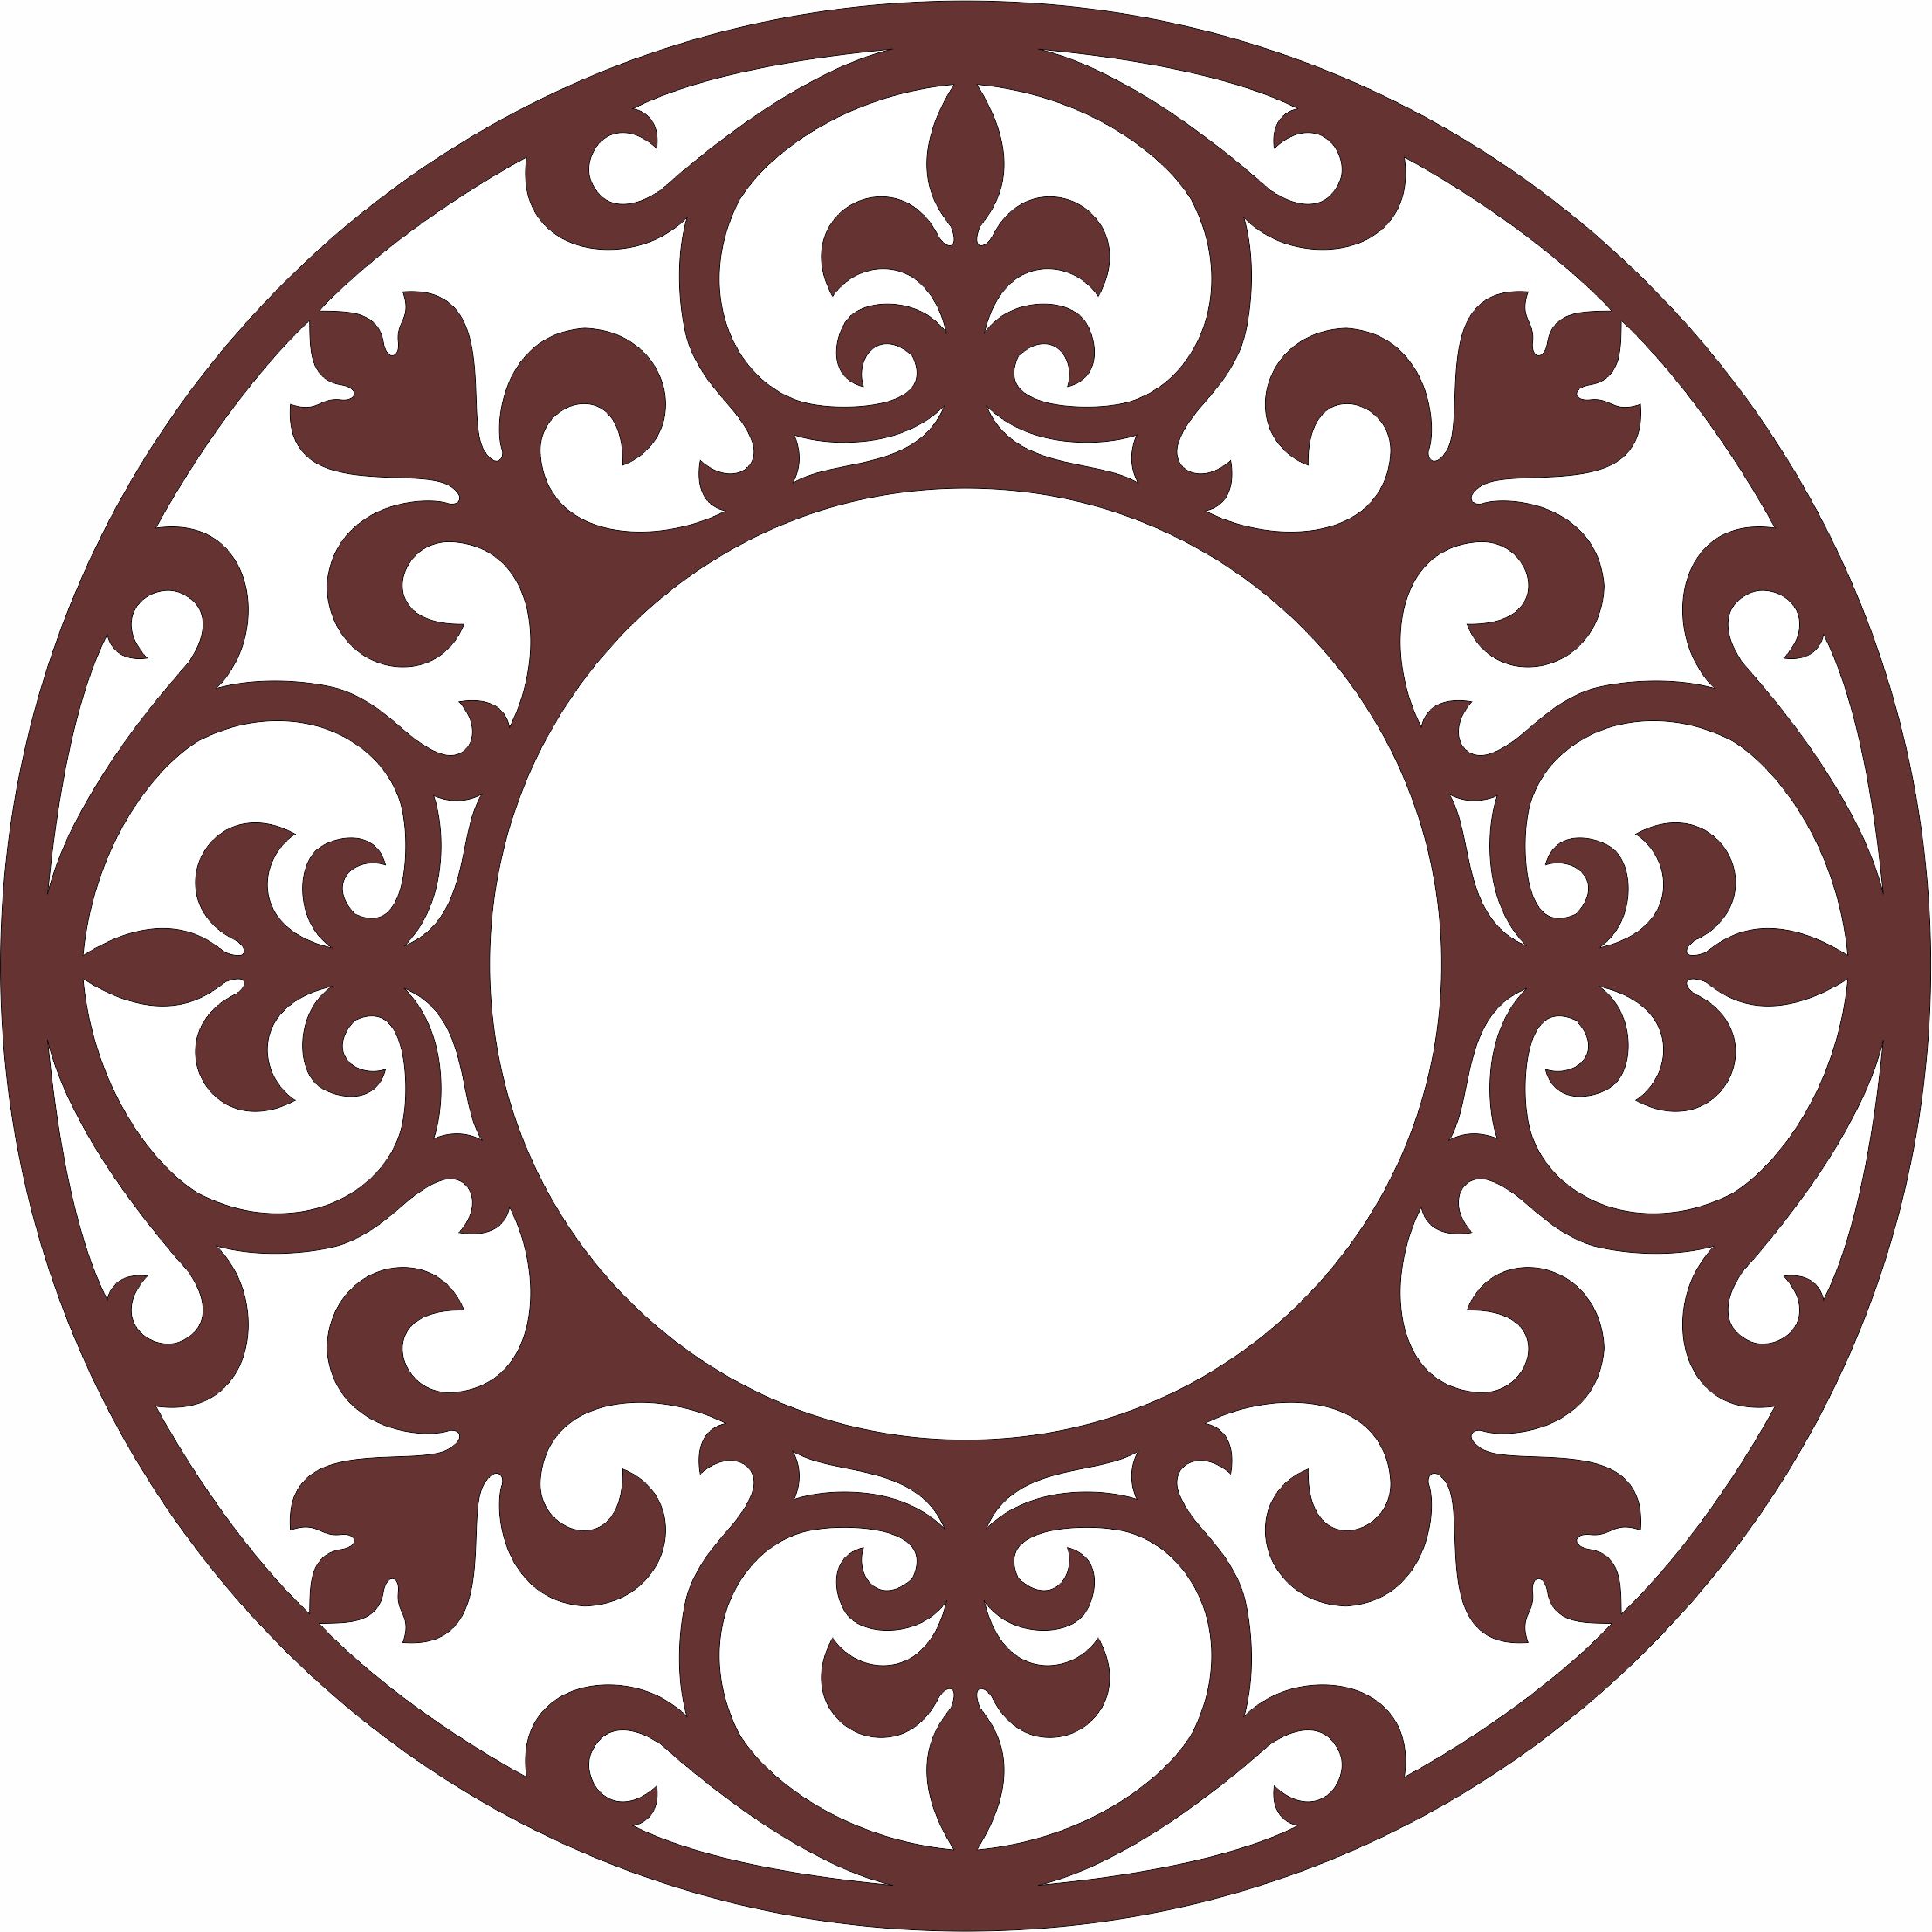 Laser Cut Privacy Partition Window Grill Round Panel Free CDR Vectors Art